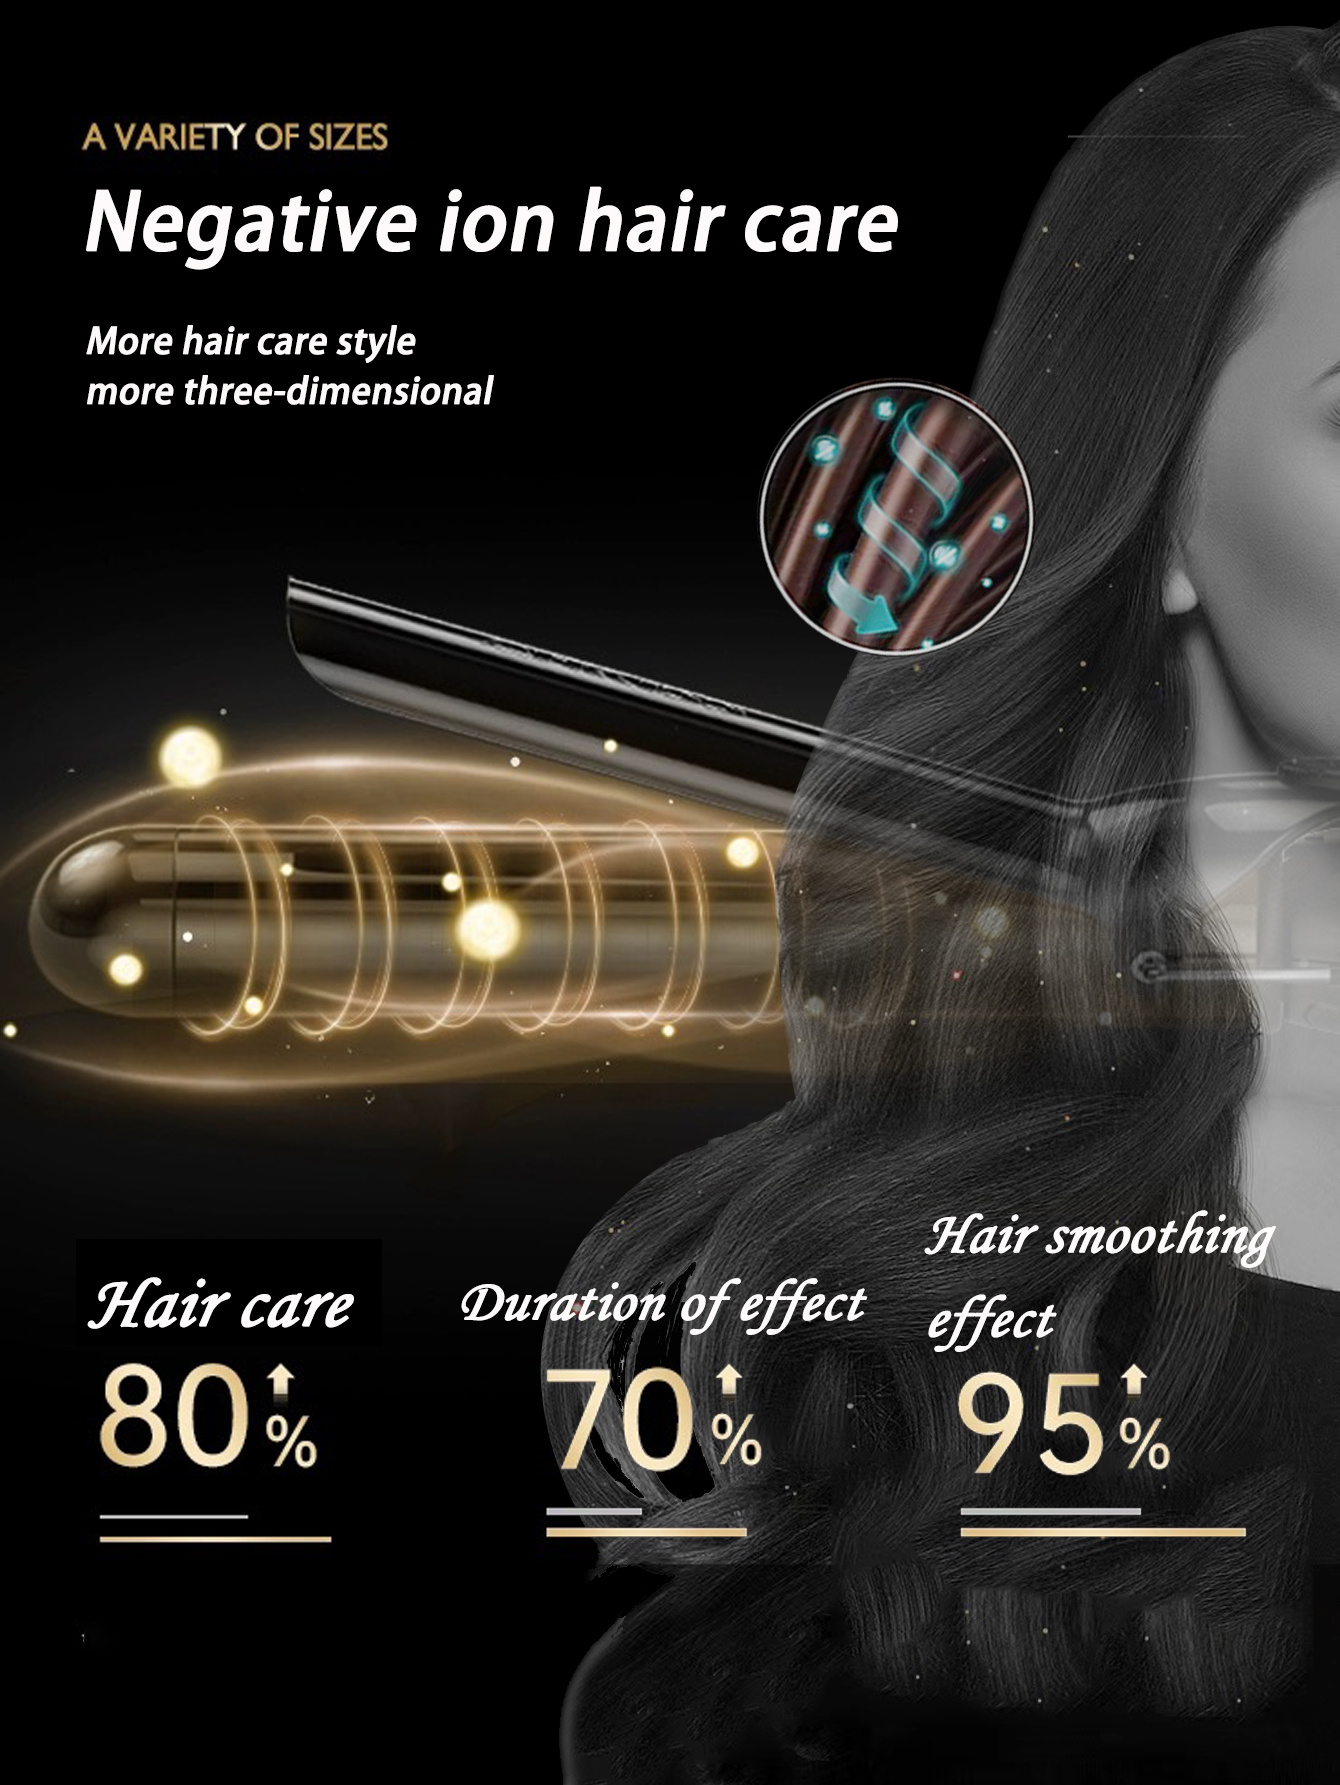 32mm Professional Ceramic Clipped Curling Iron Hair Curler Negative Ion Hair Curling Wand Electric Curling Iron details 7